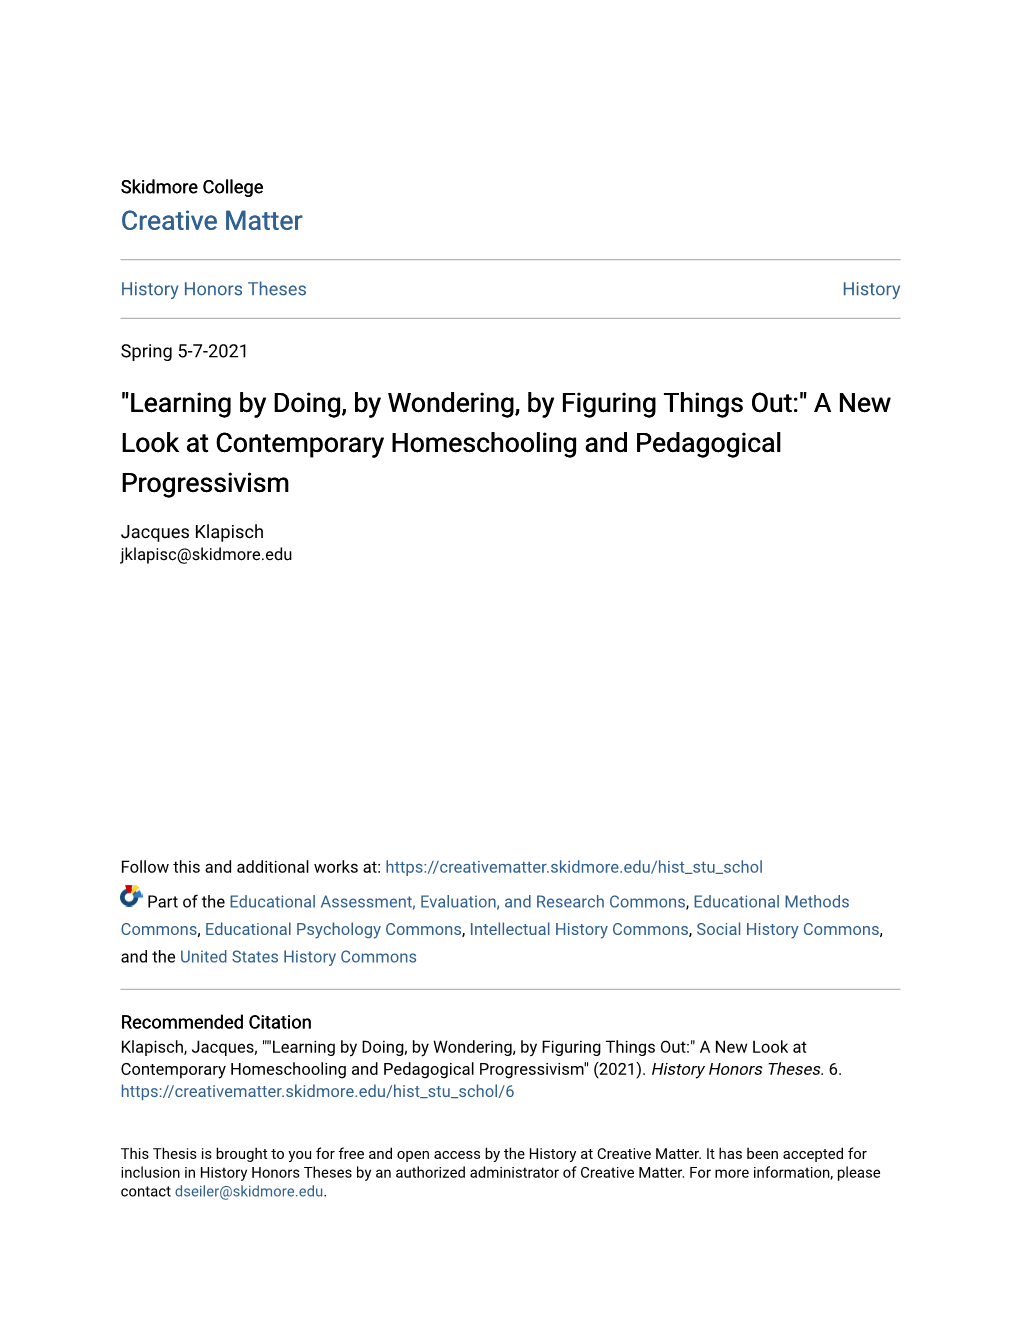 "Learning by Doing, by Wondering, by Figuring Things Out:" a New Look at Contemporary Homeschooling and Pedagogical Progressivism